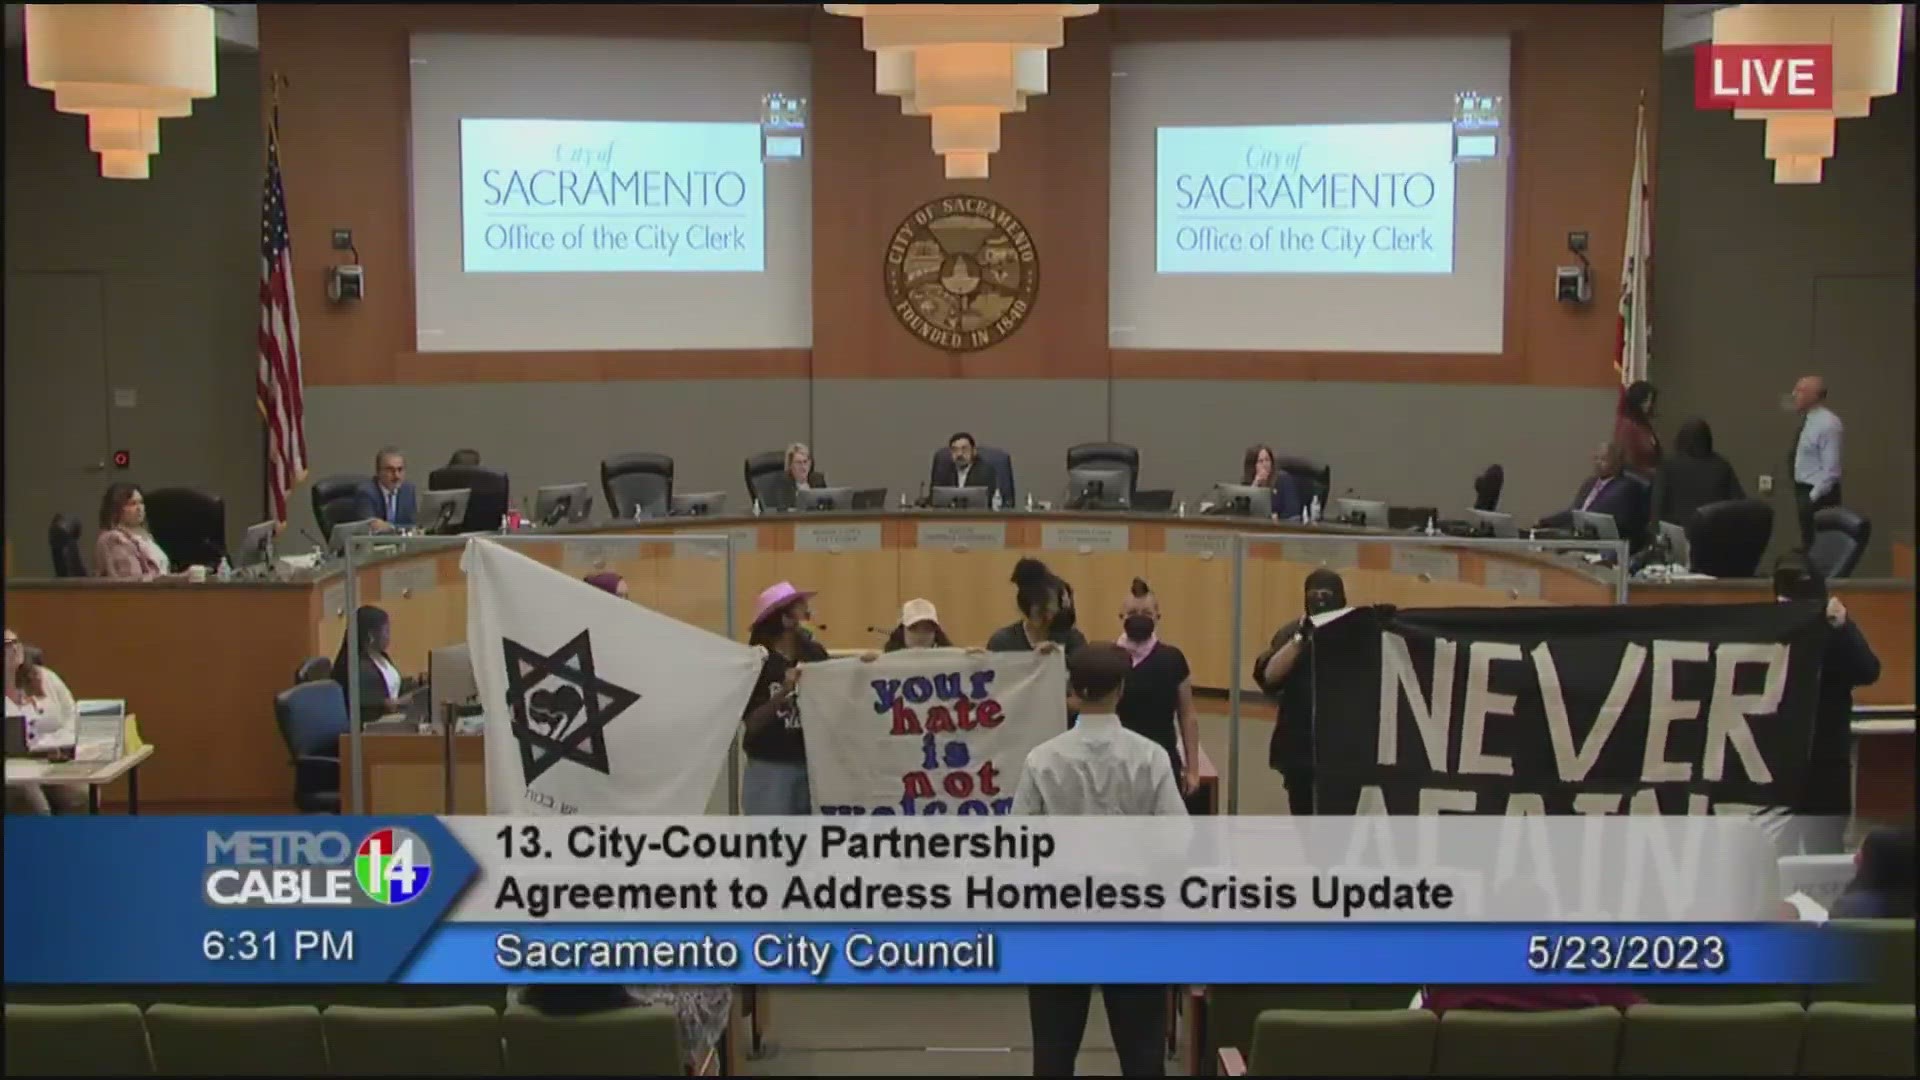 The Sacramento City Council meeting got heated after some speakers expressed anti-semitic remarks.